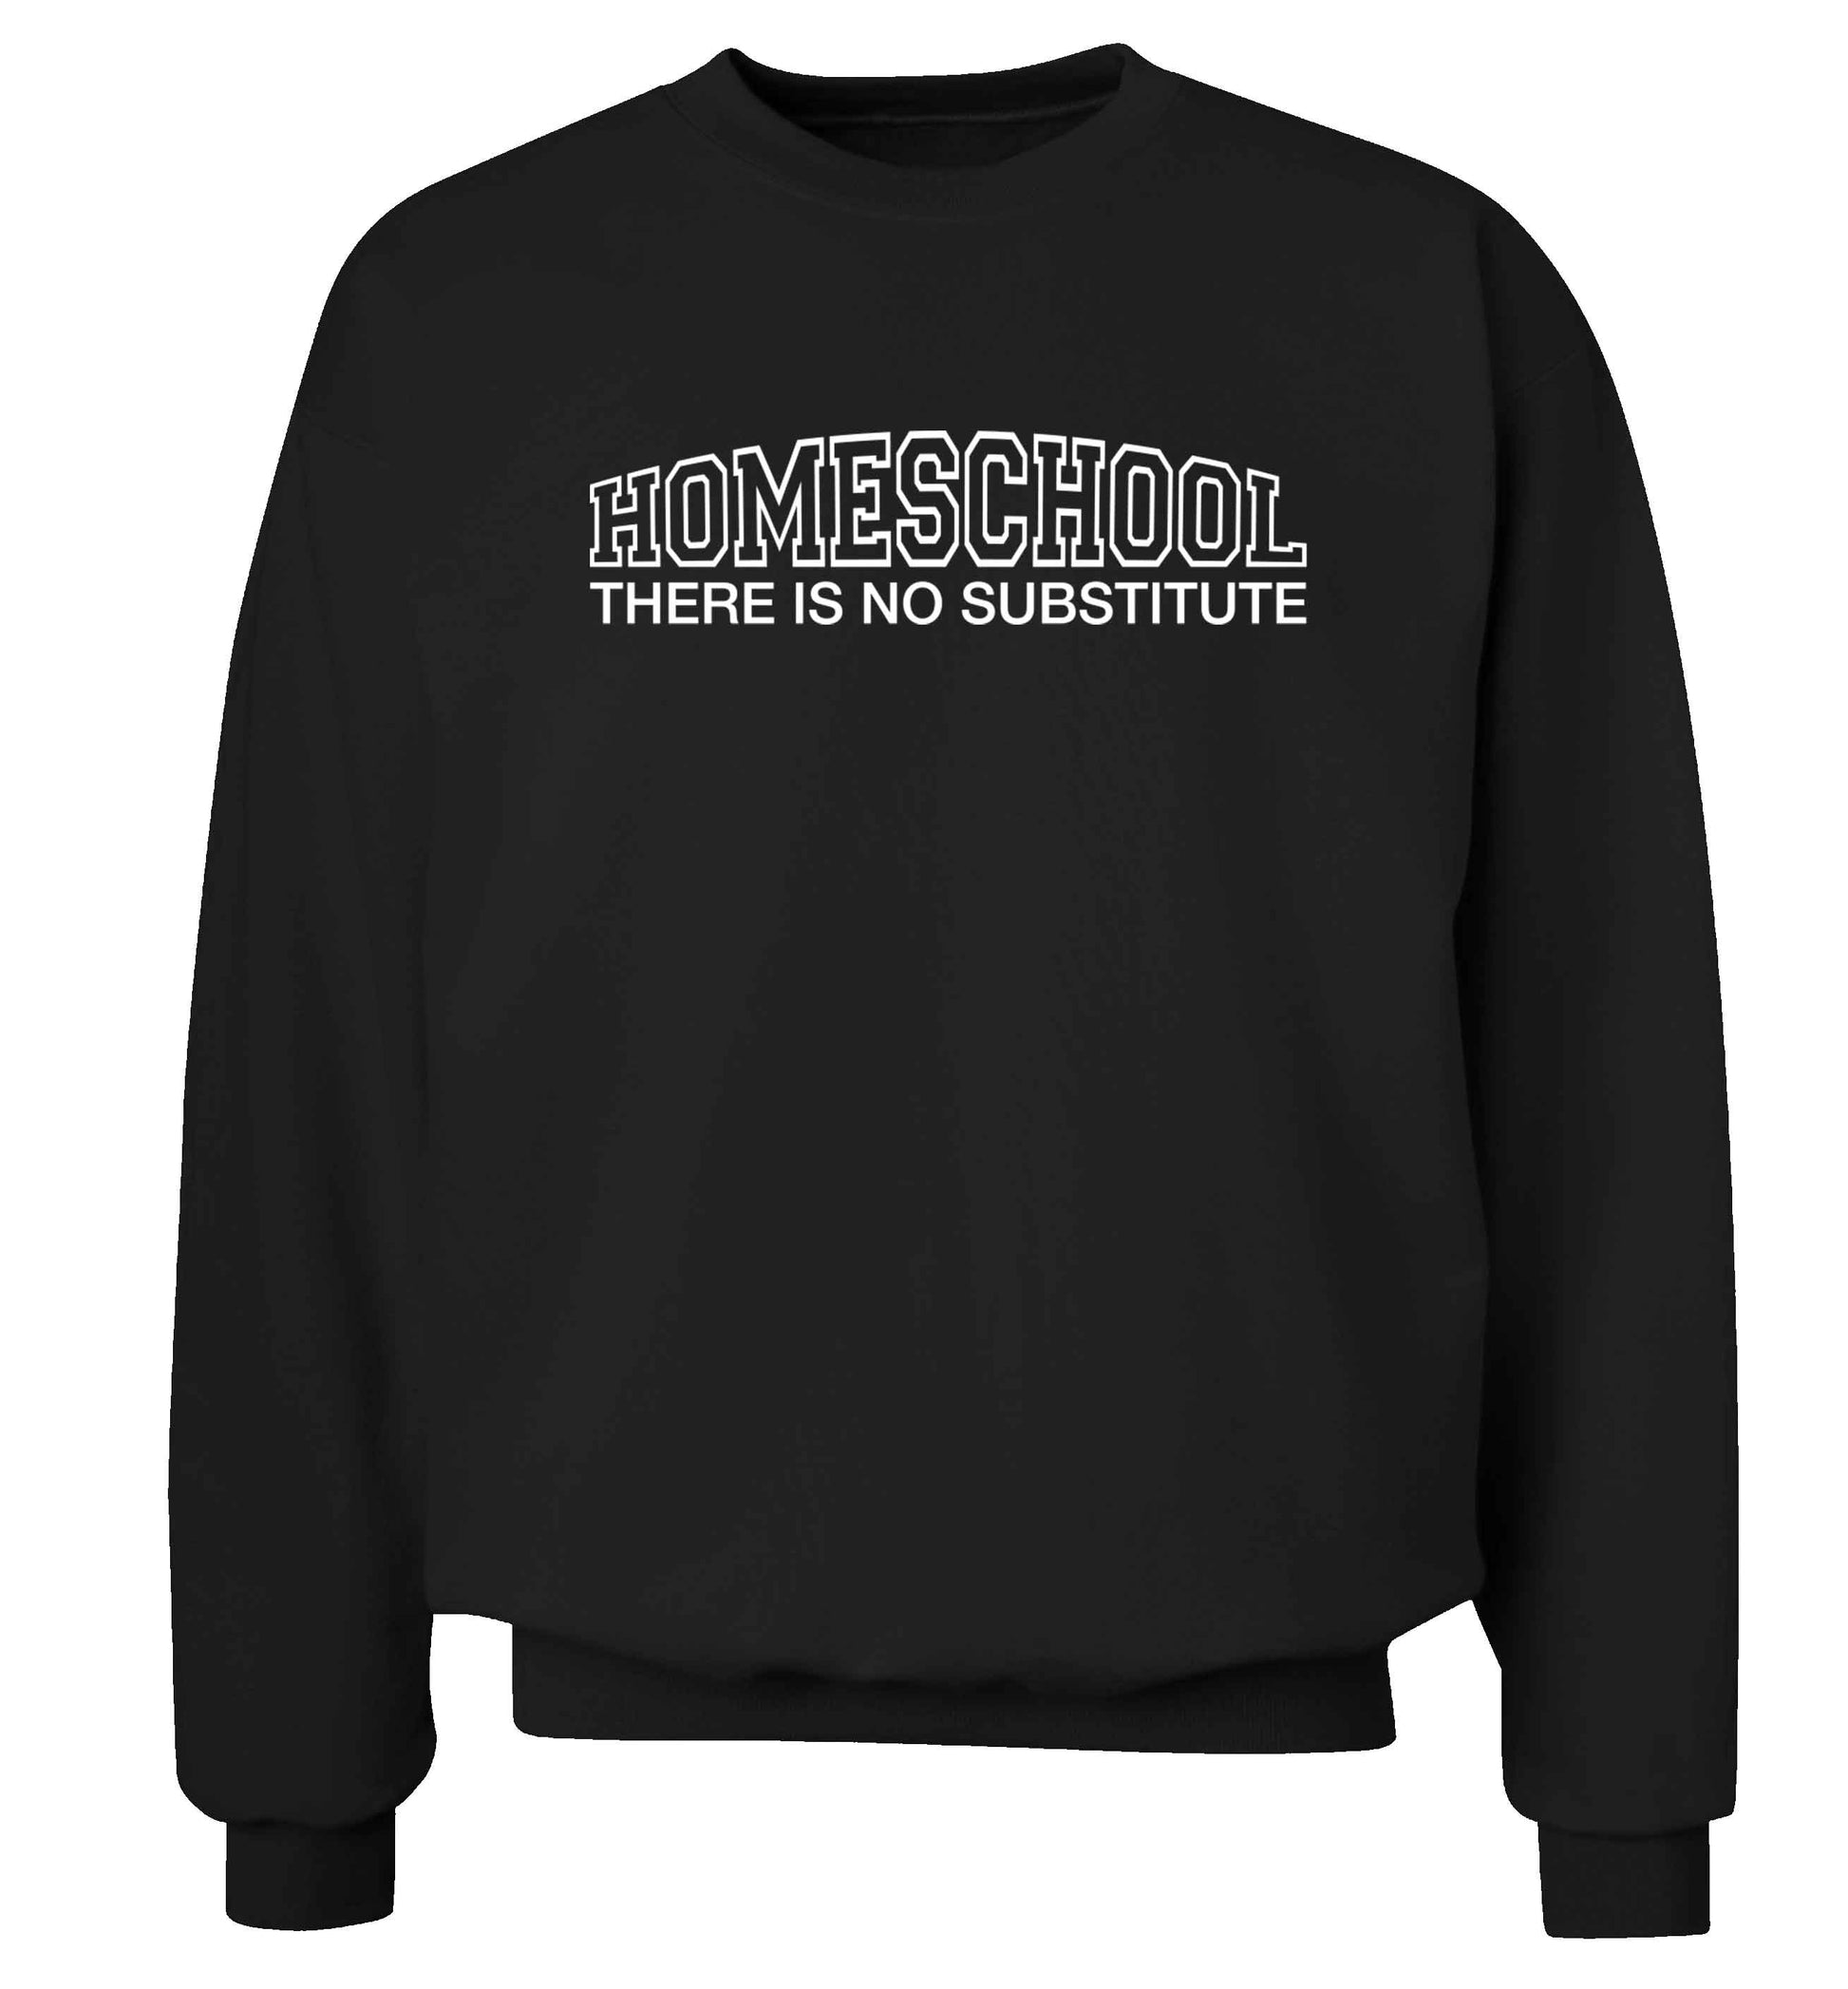 Homeschool there is not substitute Adult's unisex black Sweater 2XL